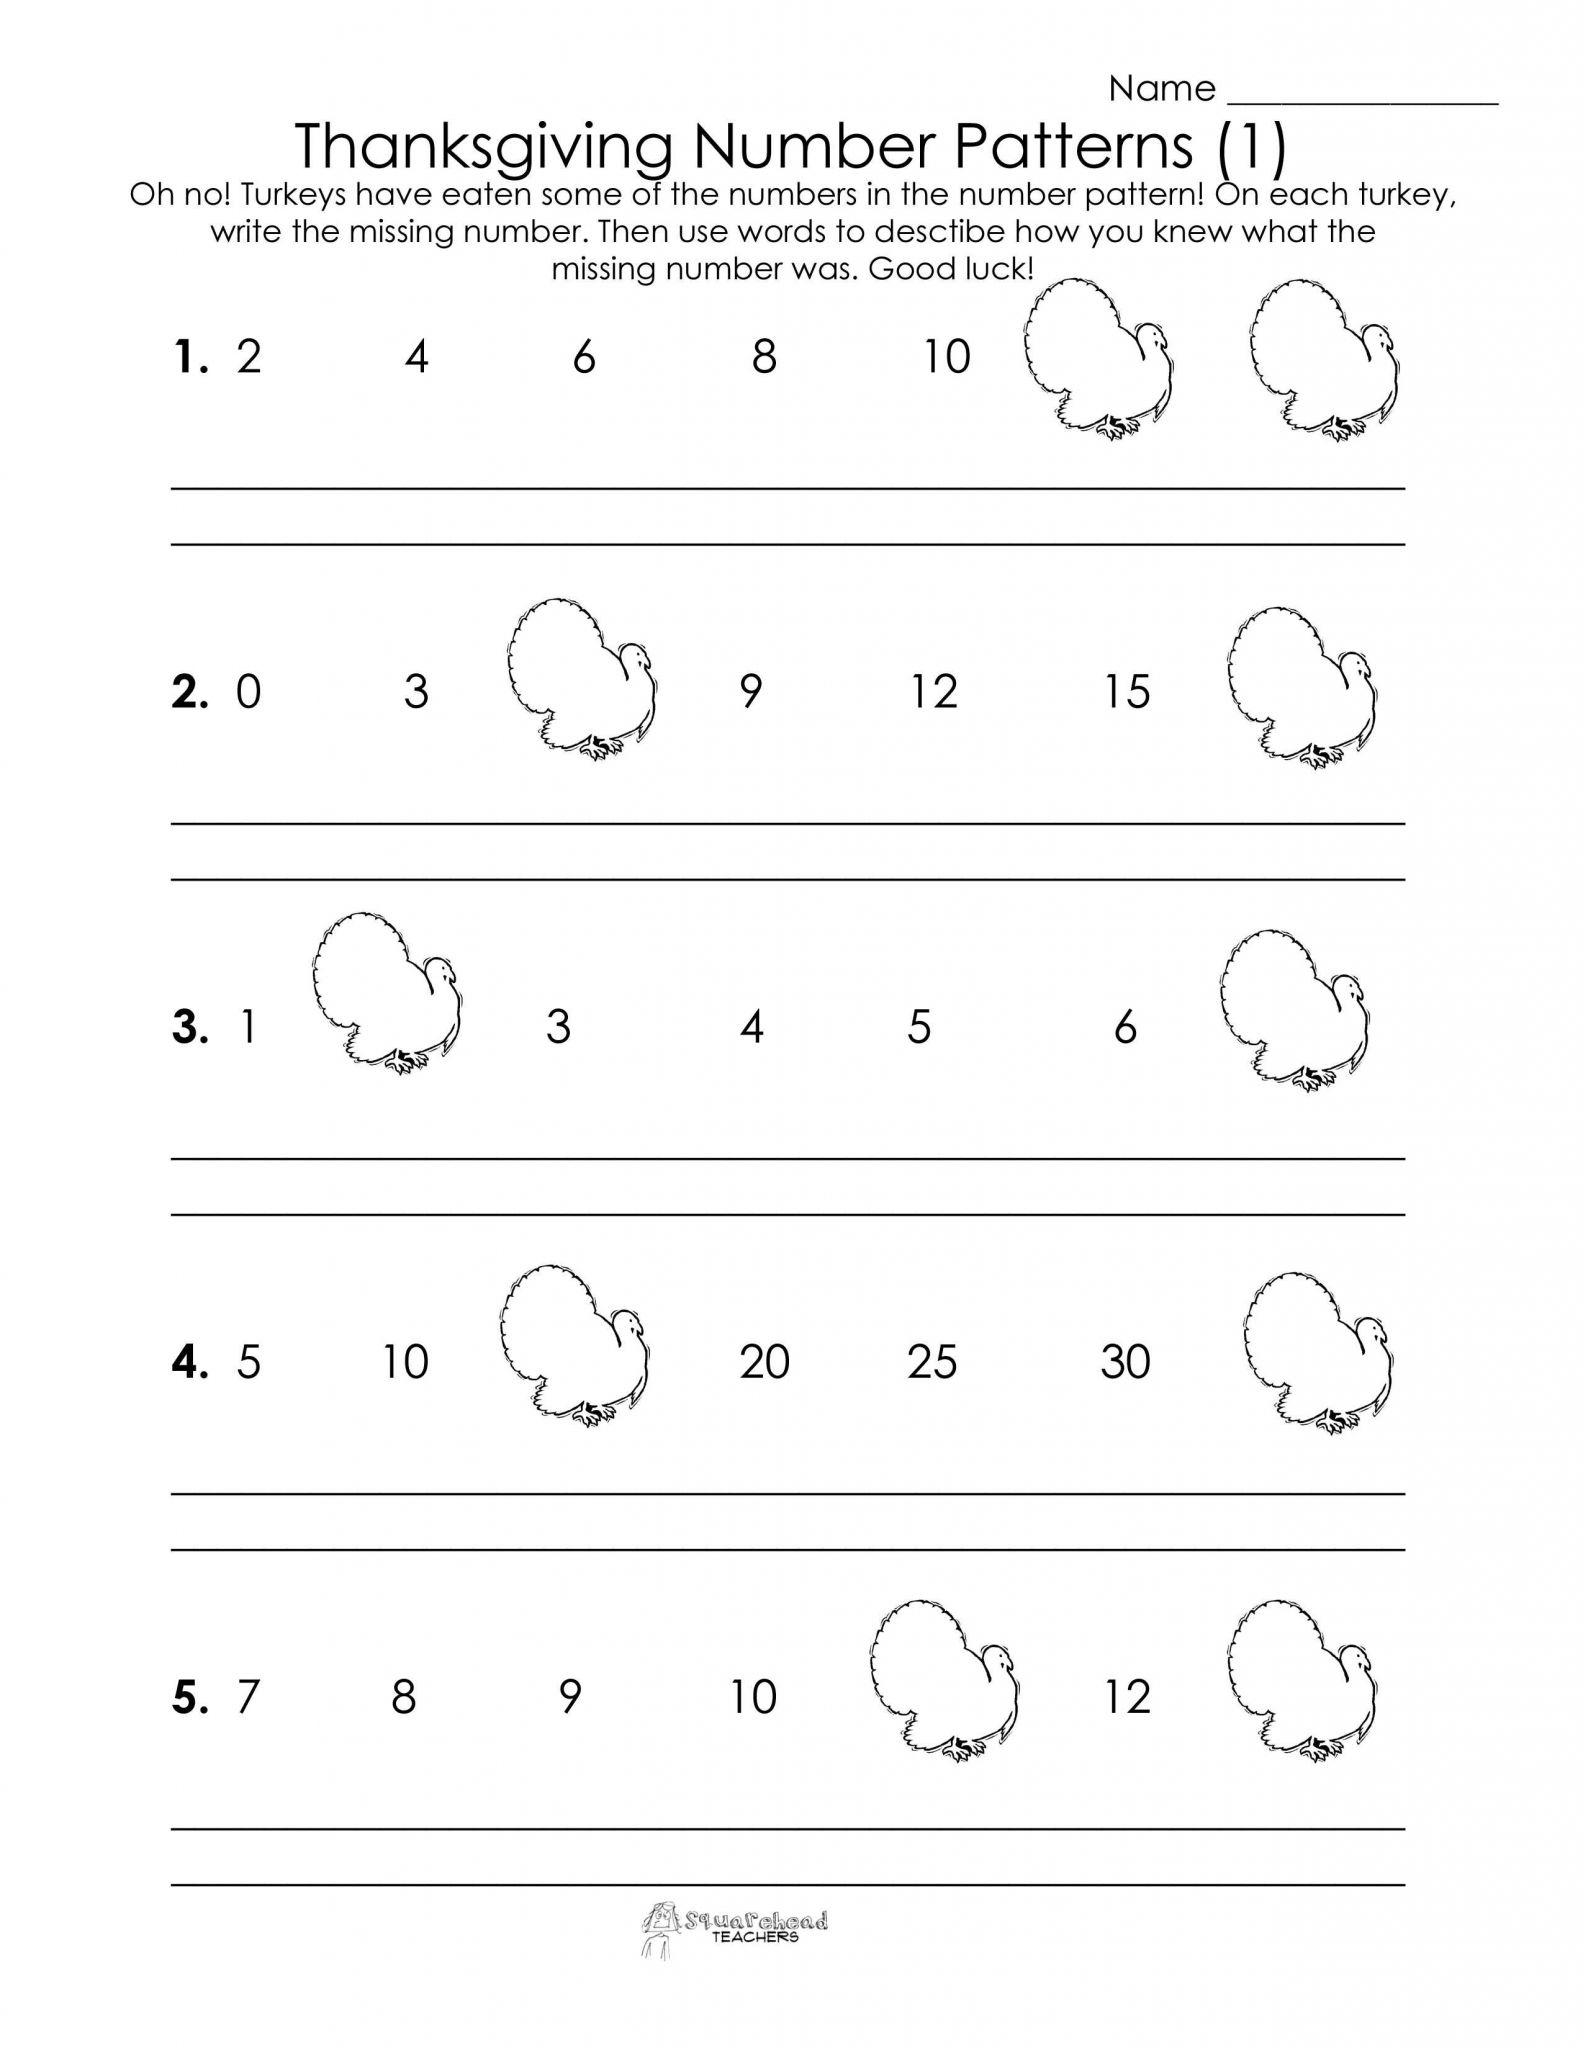 Fairy Tale Worksheets together with Worksheets for All Download and Free Math Cut Paste Story